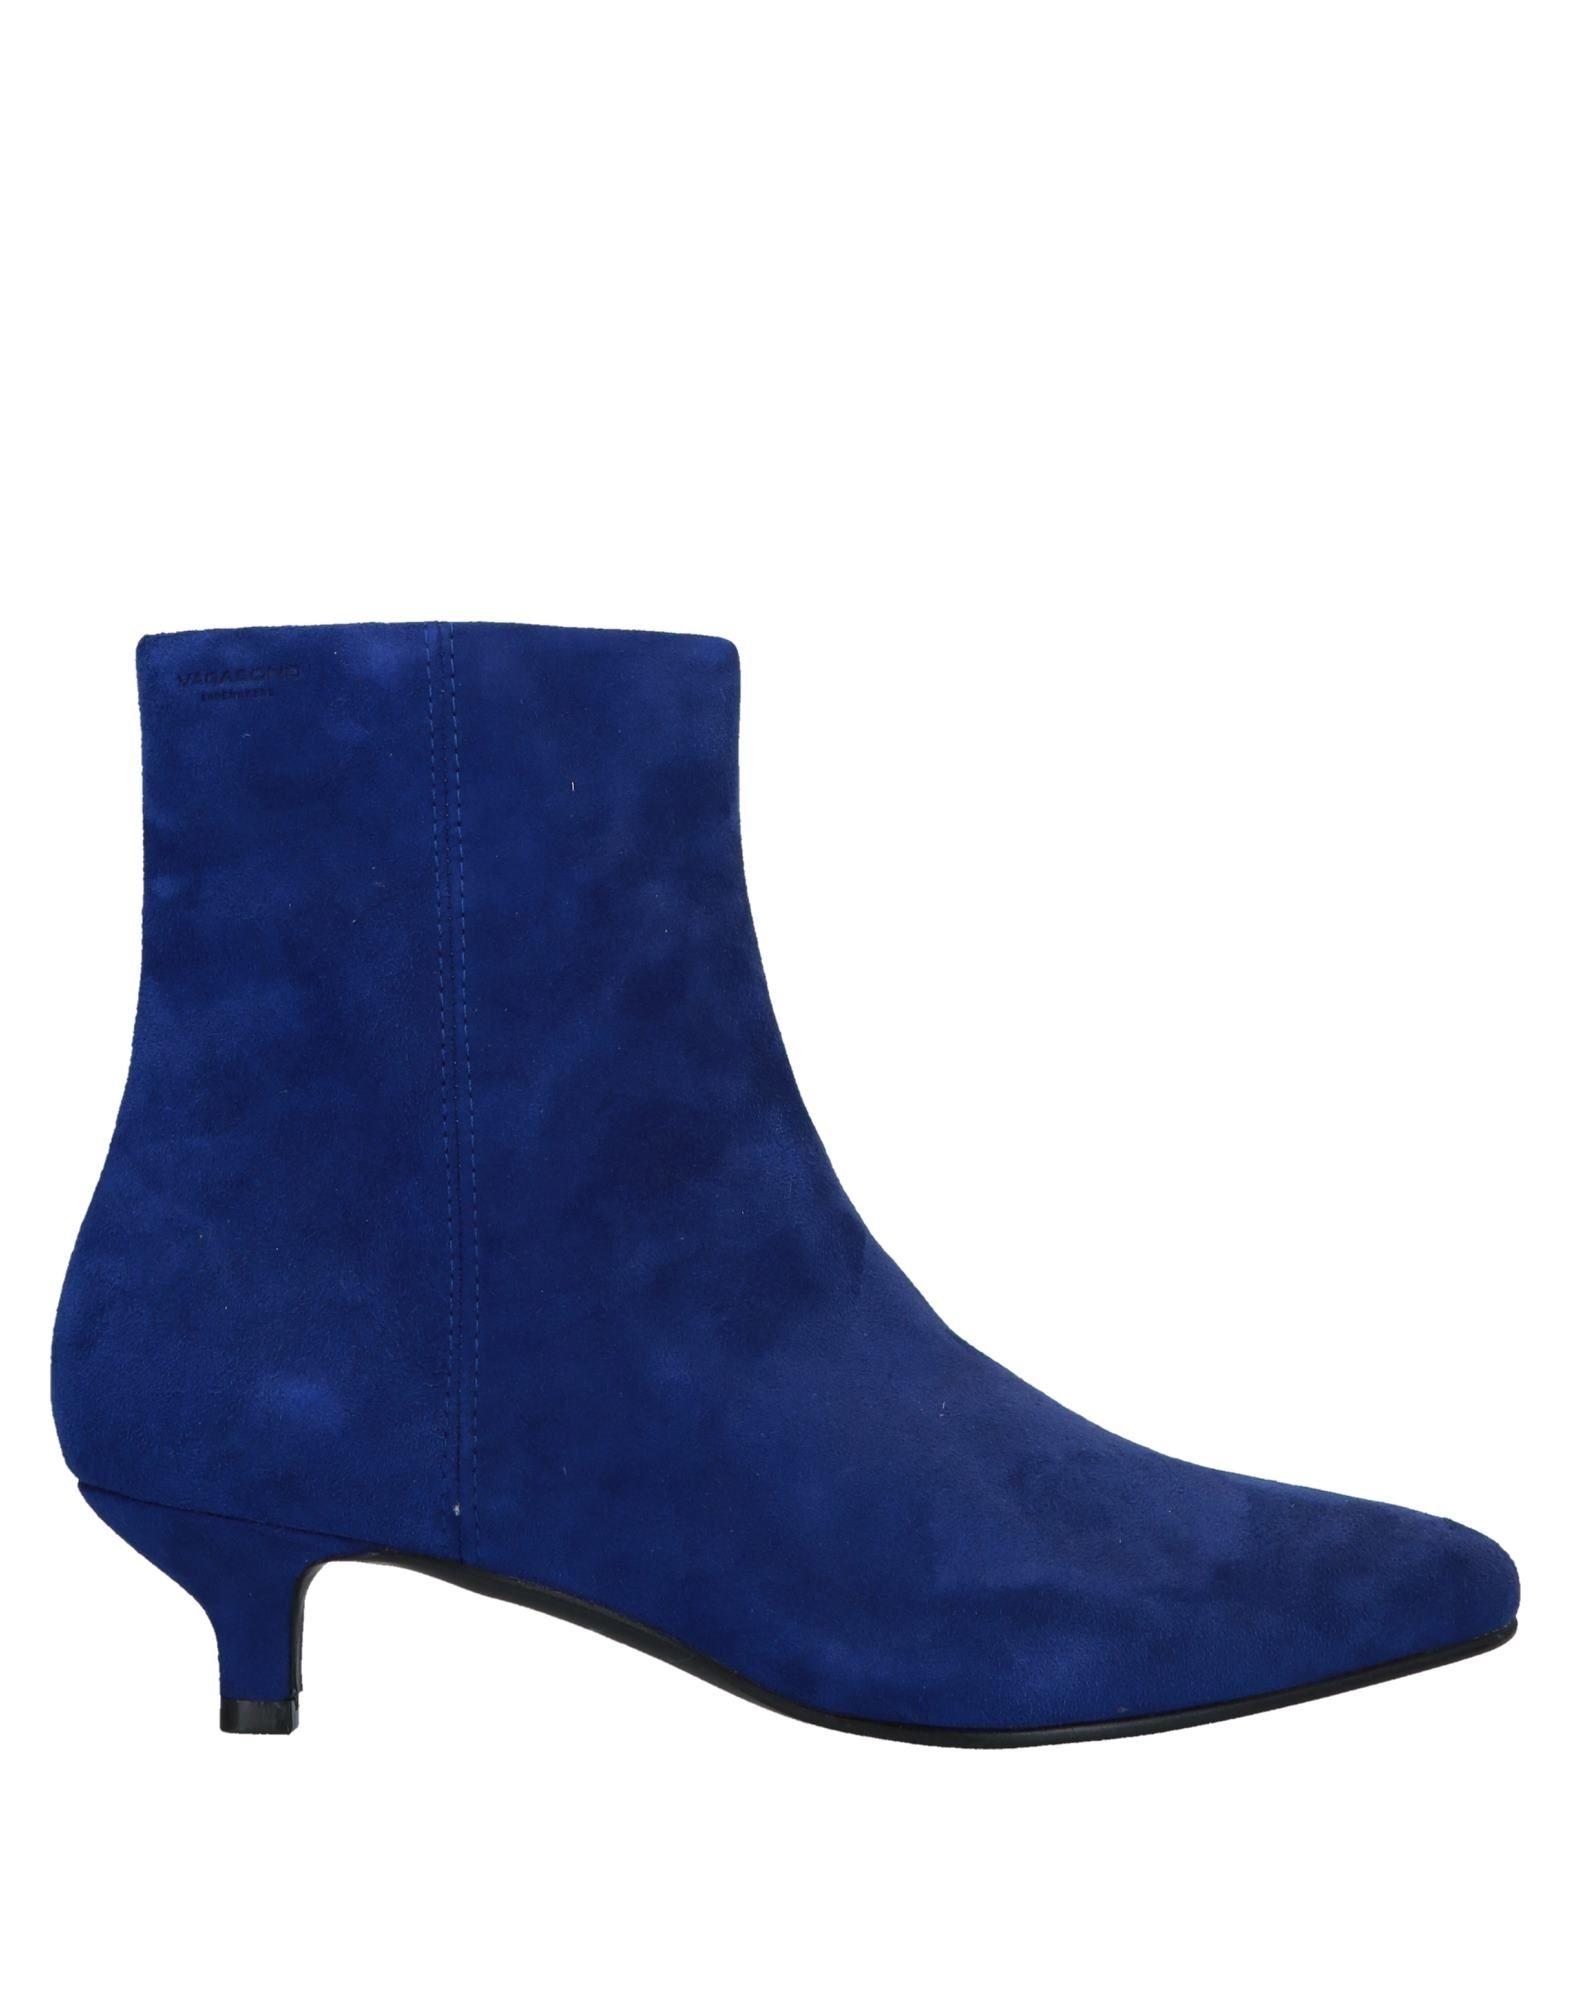 Vagabond Ankle Boots in Blue - Lyst